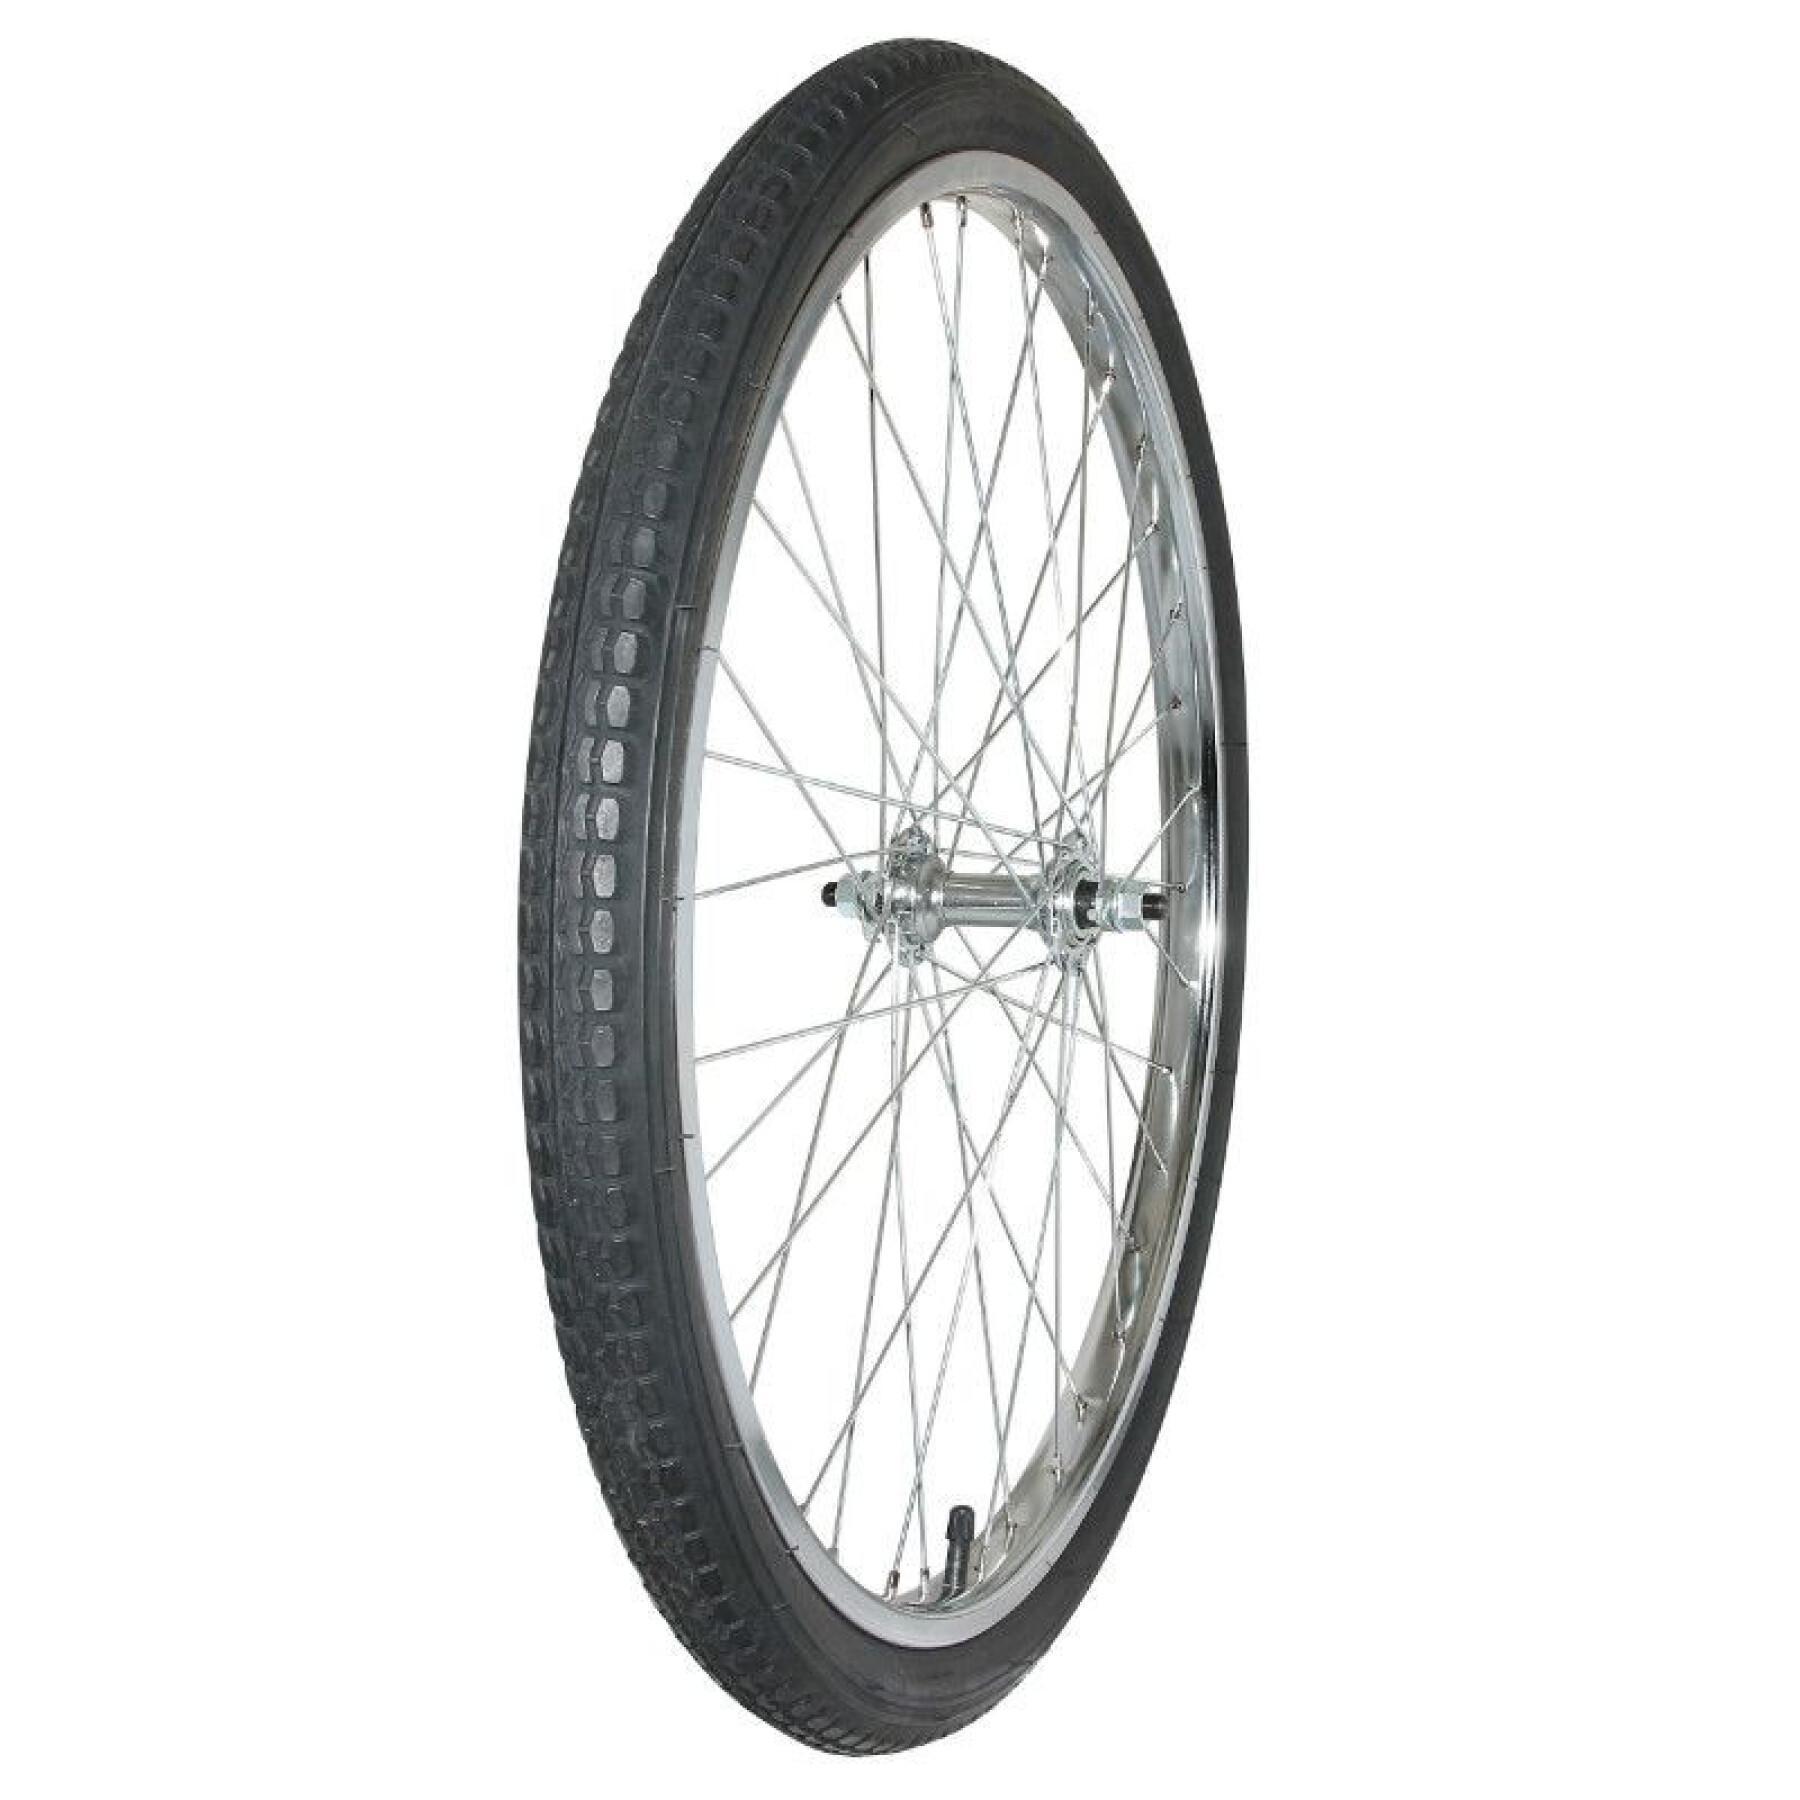 Front bicycle wheel for tricycle P2R 125803 24"